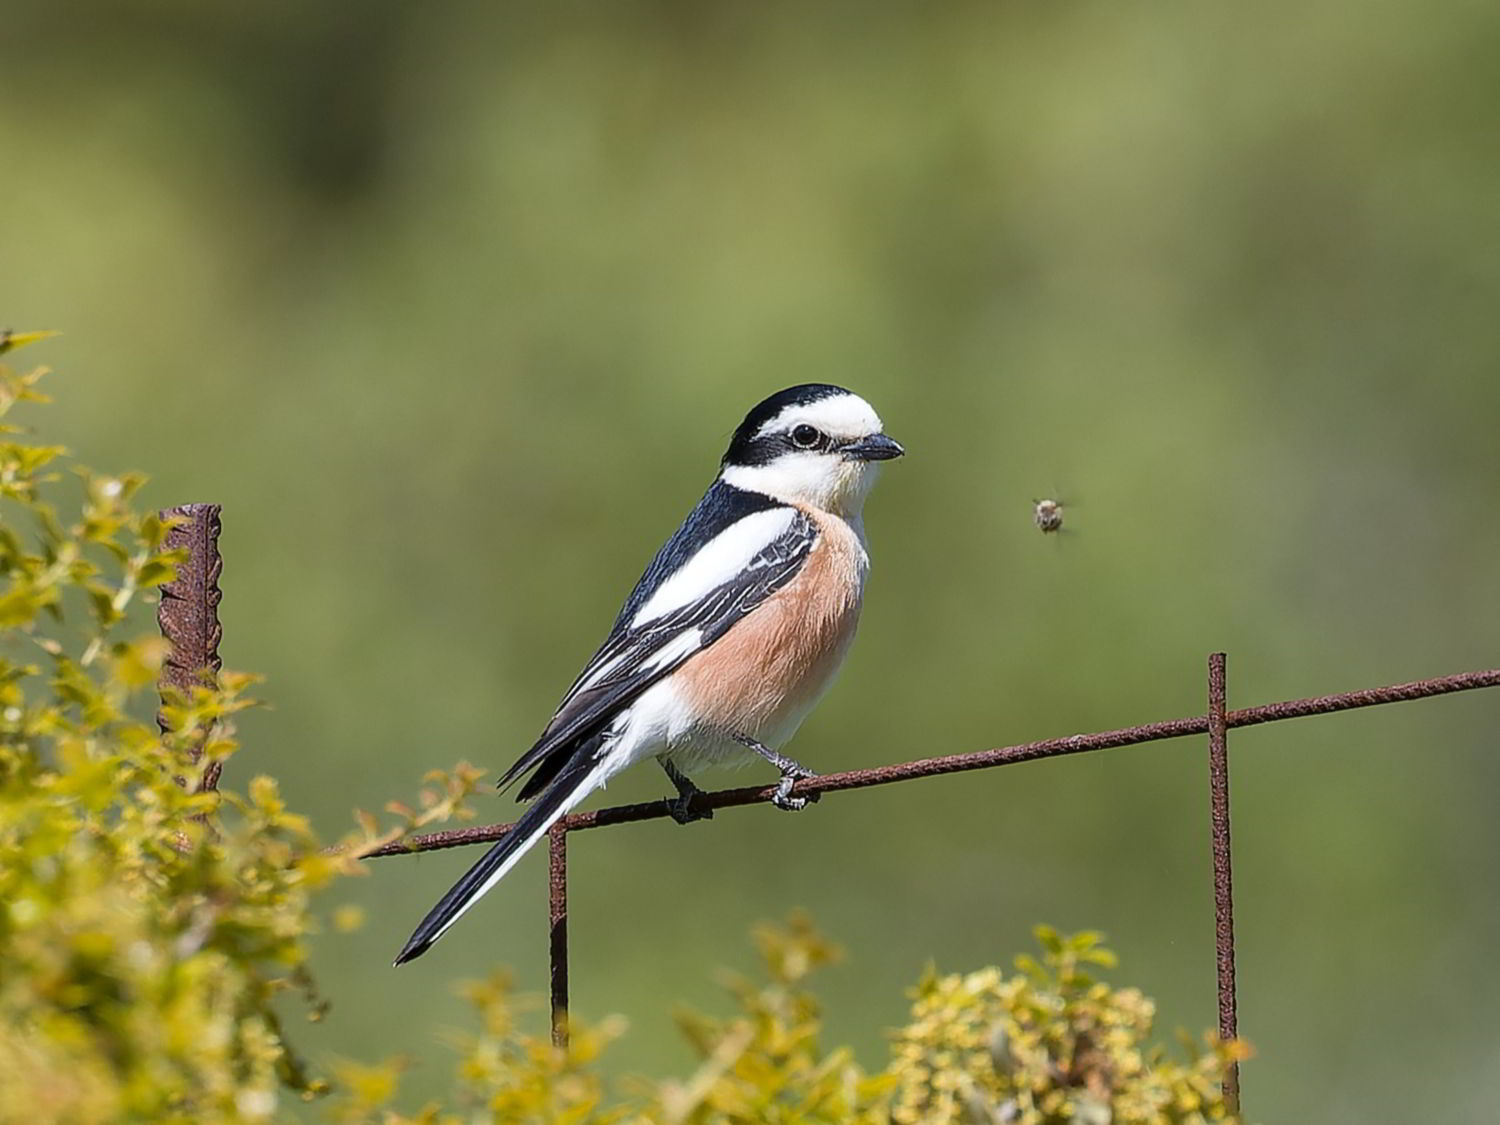 Masked Shrike perched on a metal fence with an insect flying past